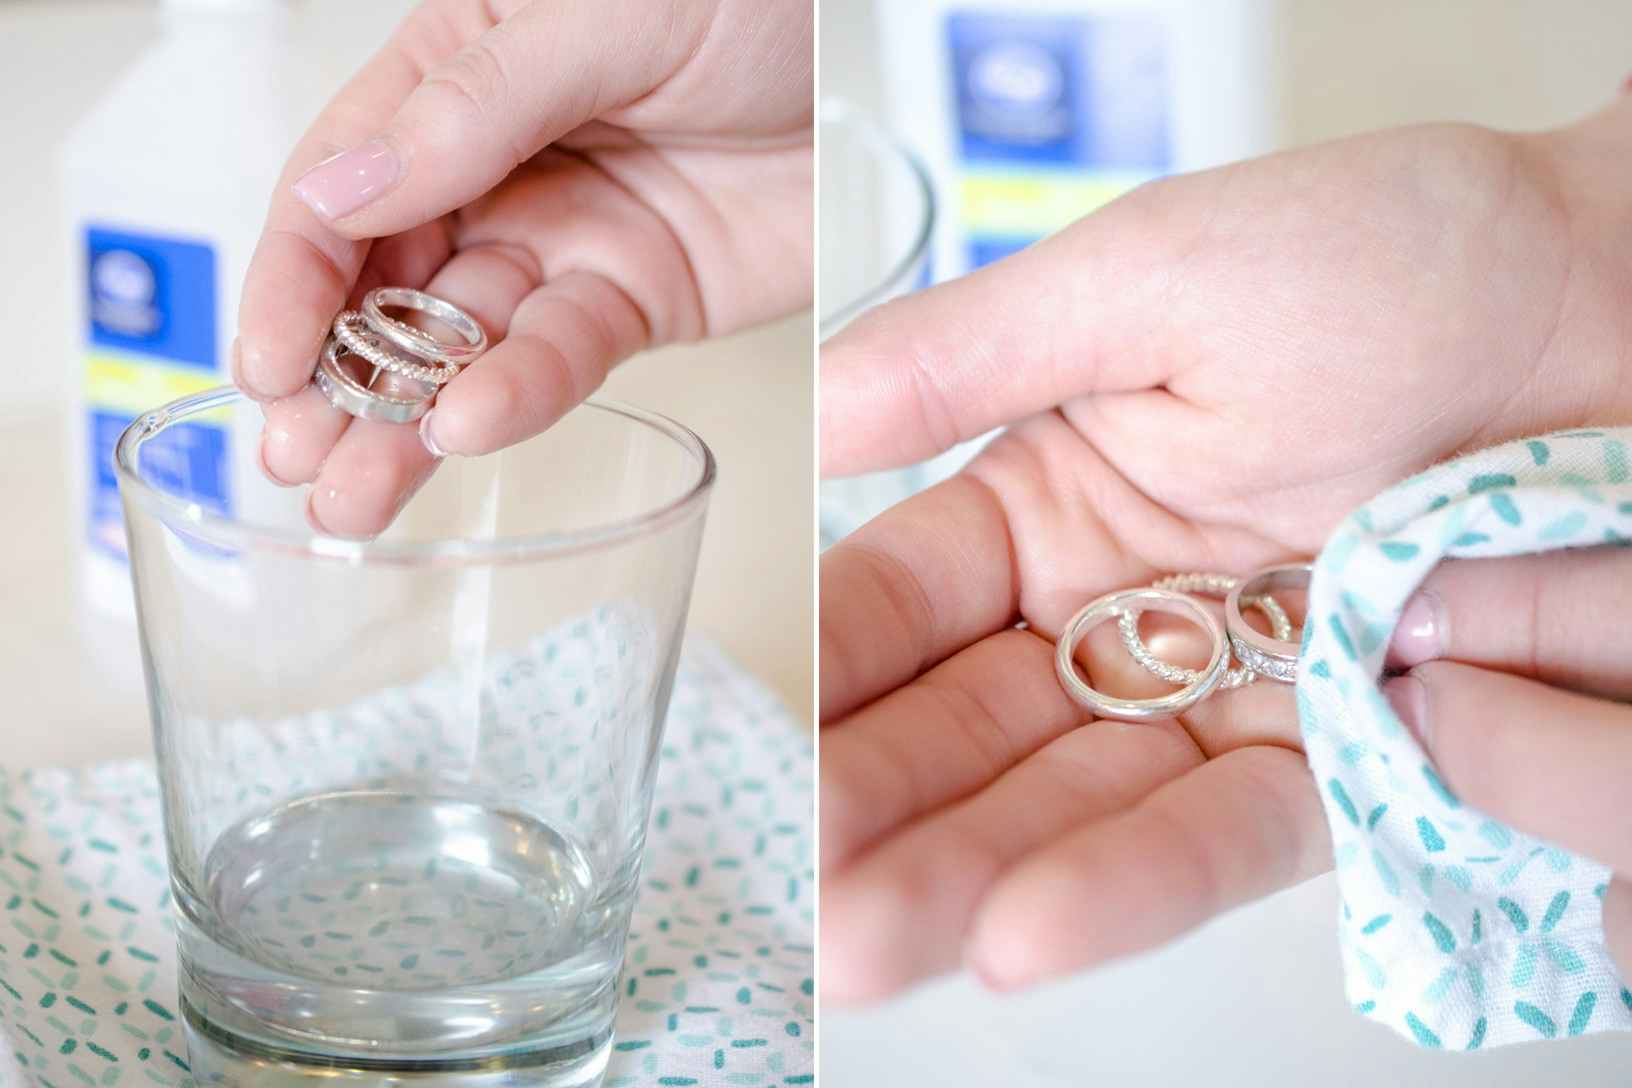 Use as a jewelry cleaner.